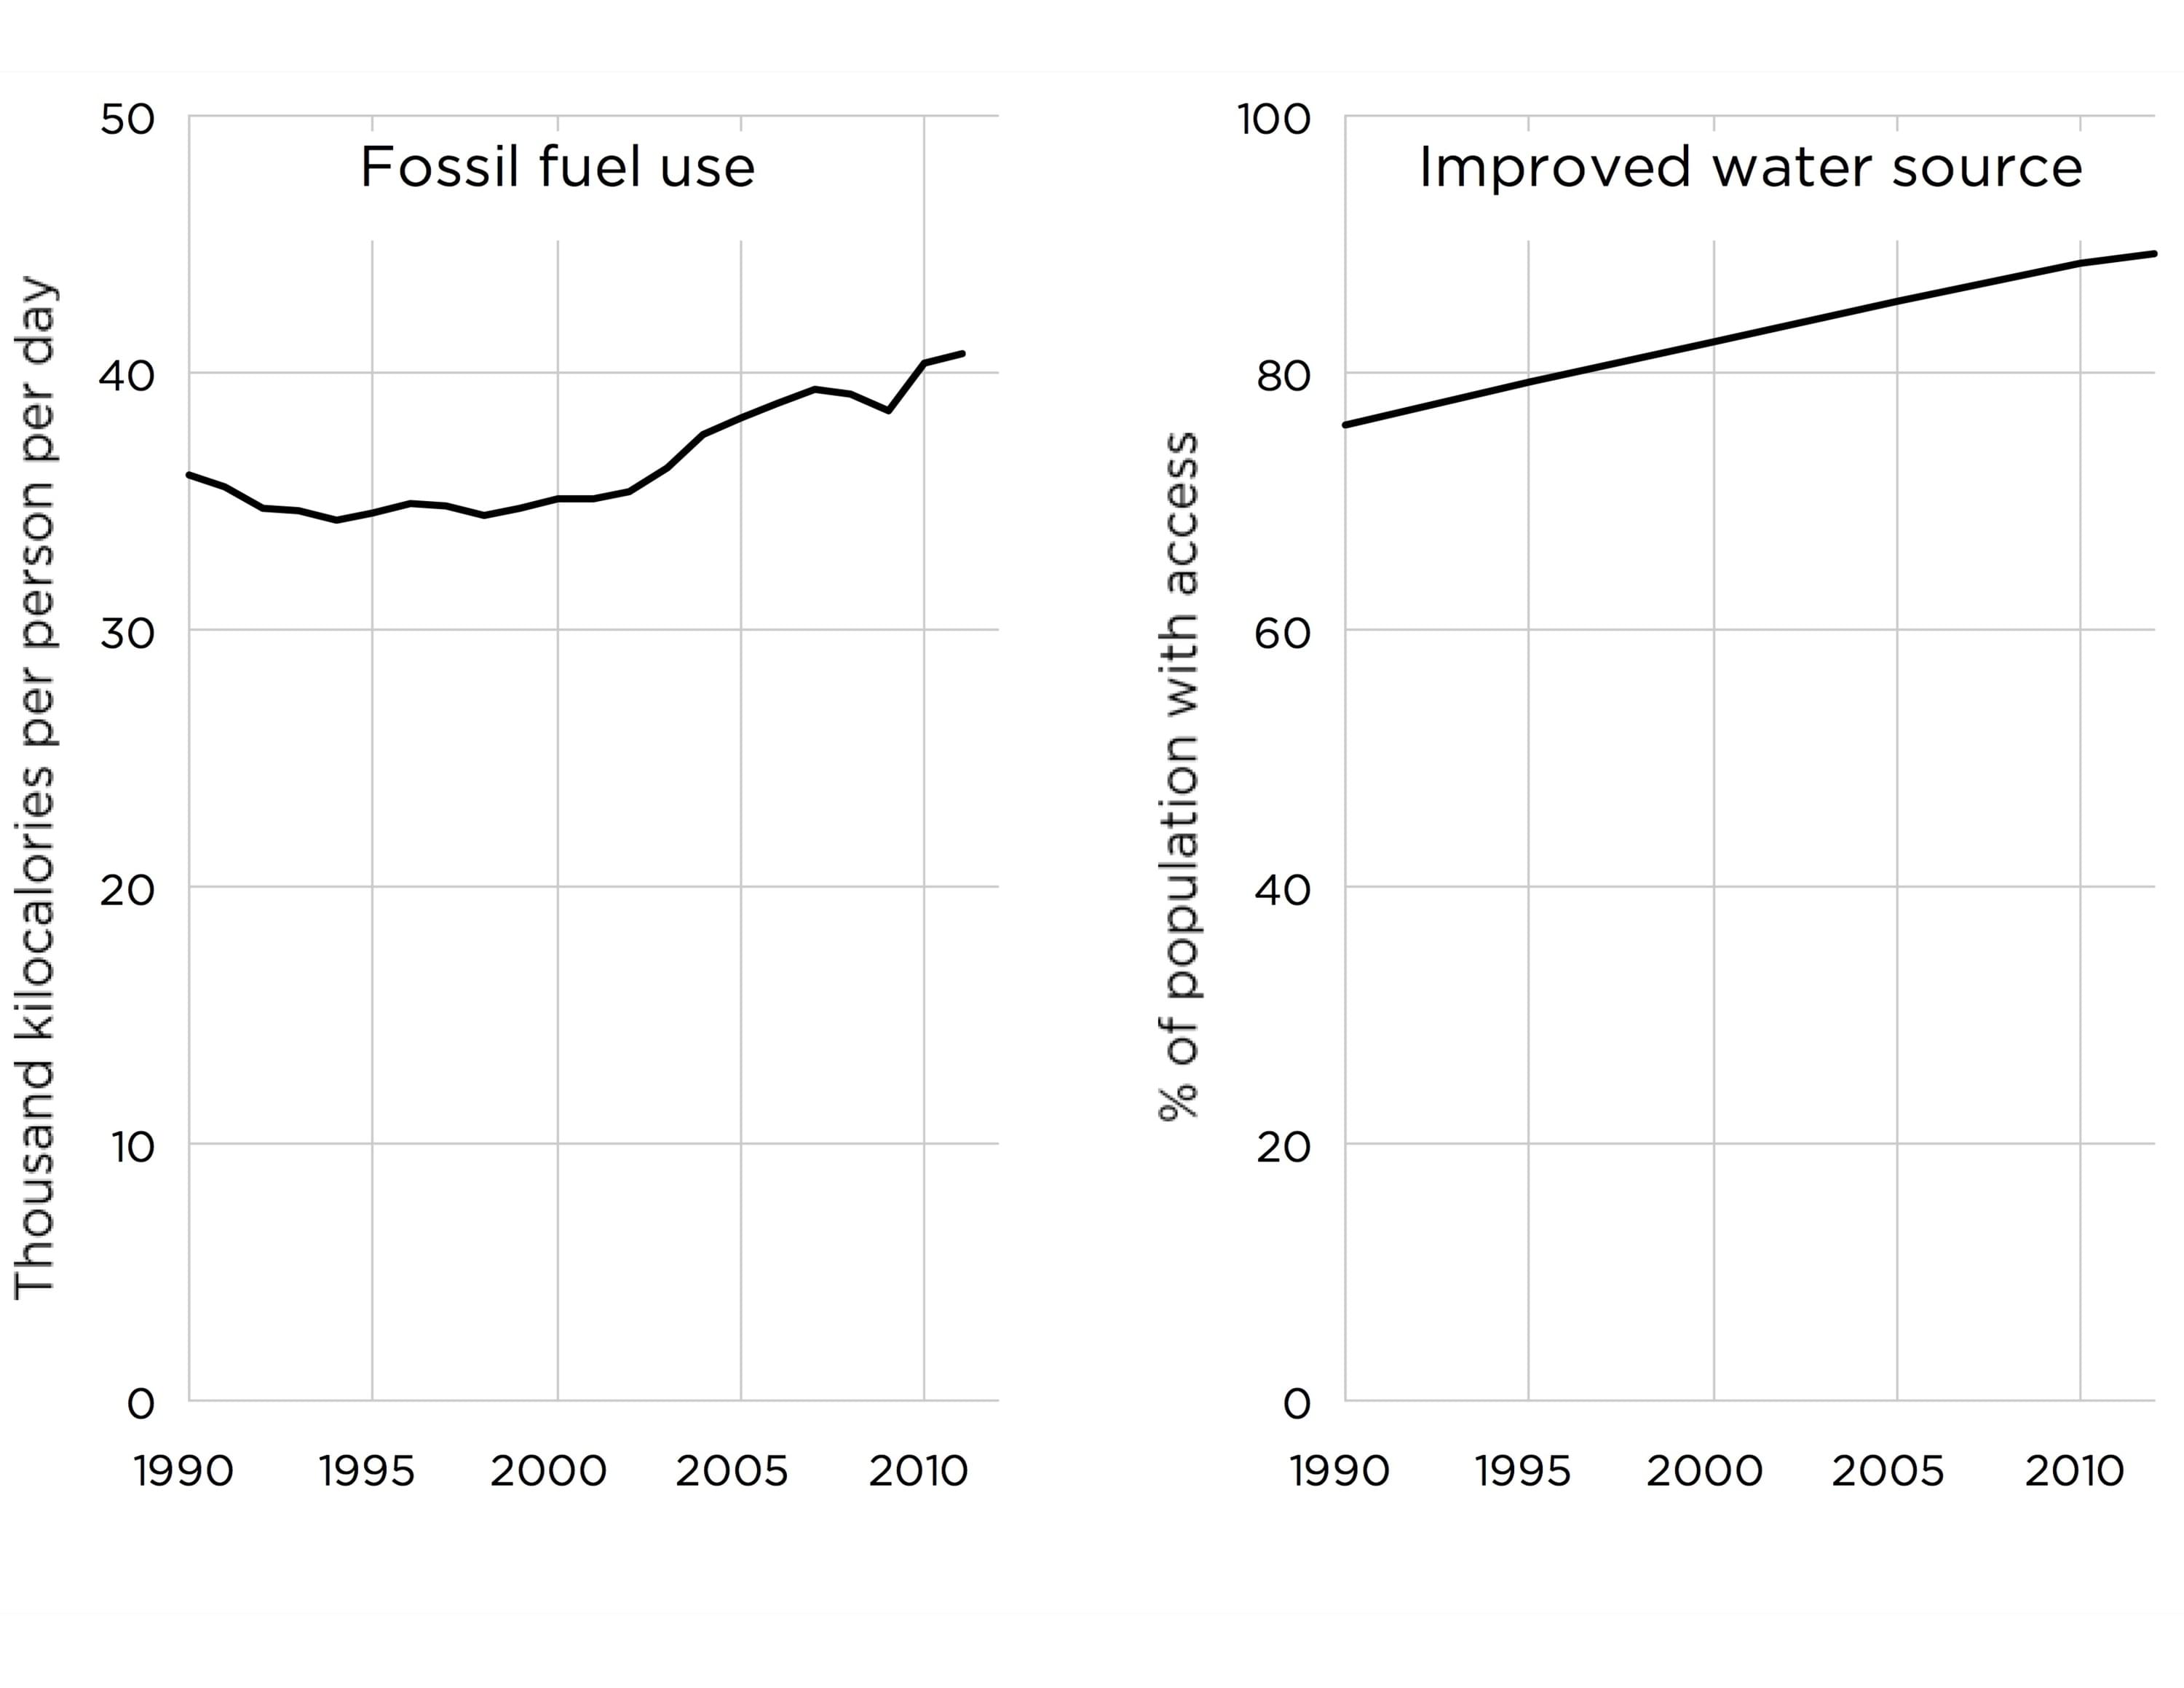 Figures and Data from The Moral Case for Fossil Fuels by Alex Epstein